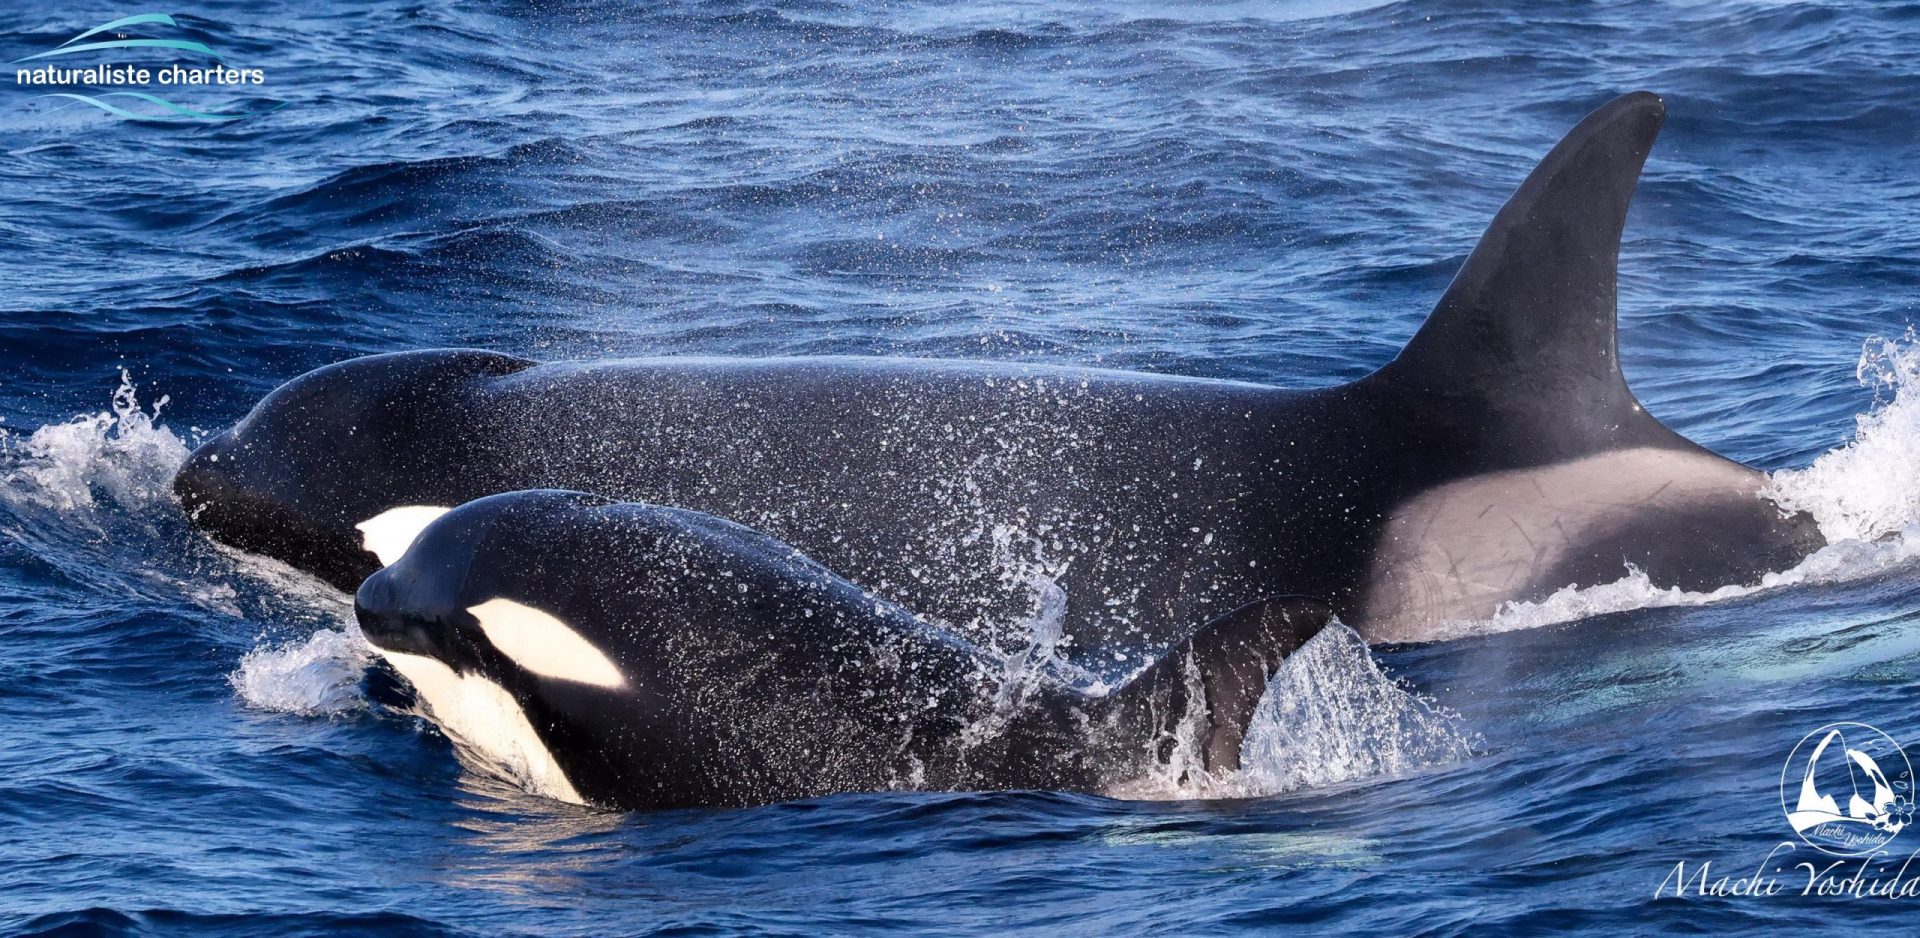 Super Pods And Surging Orca Naturaliste Charters